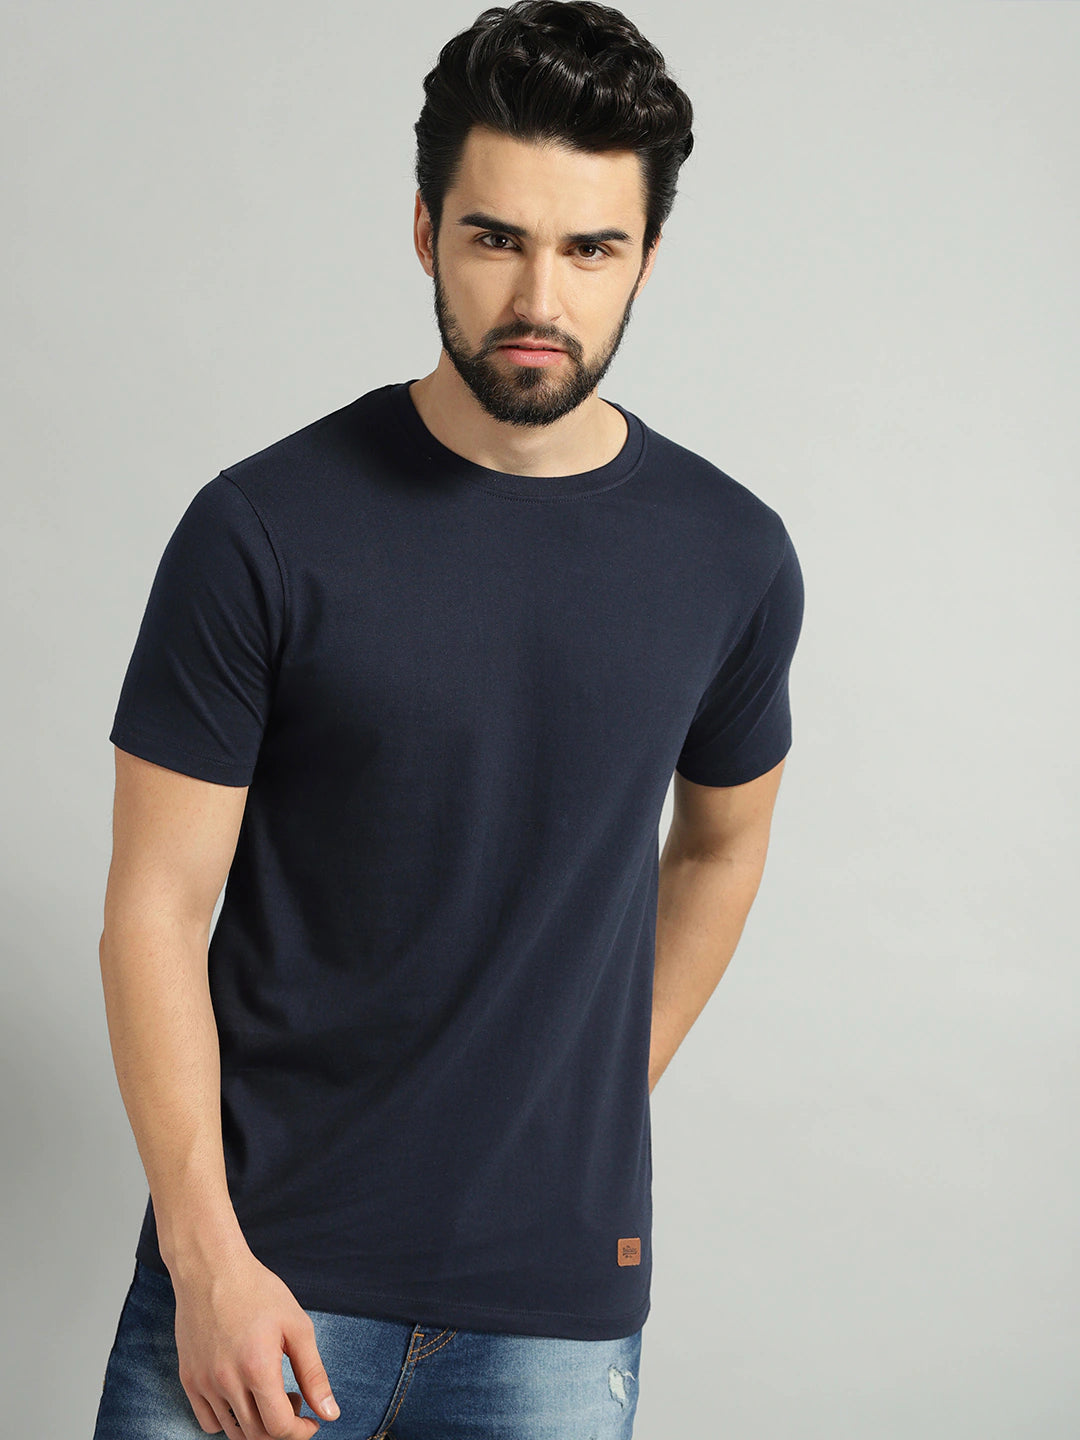 Pack of 3 t-shirt at 10% discount